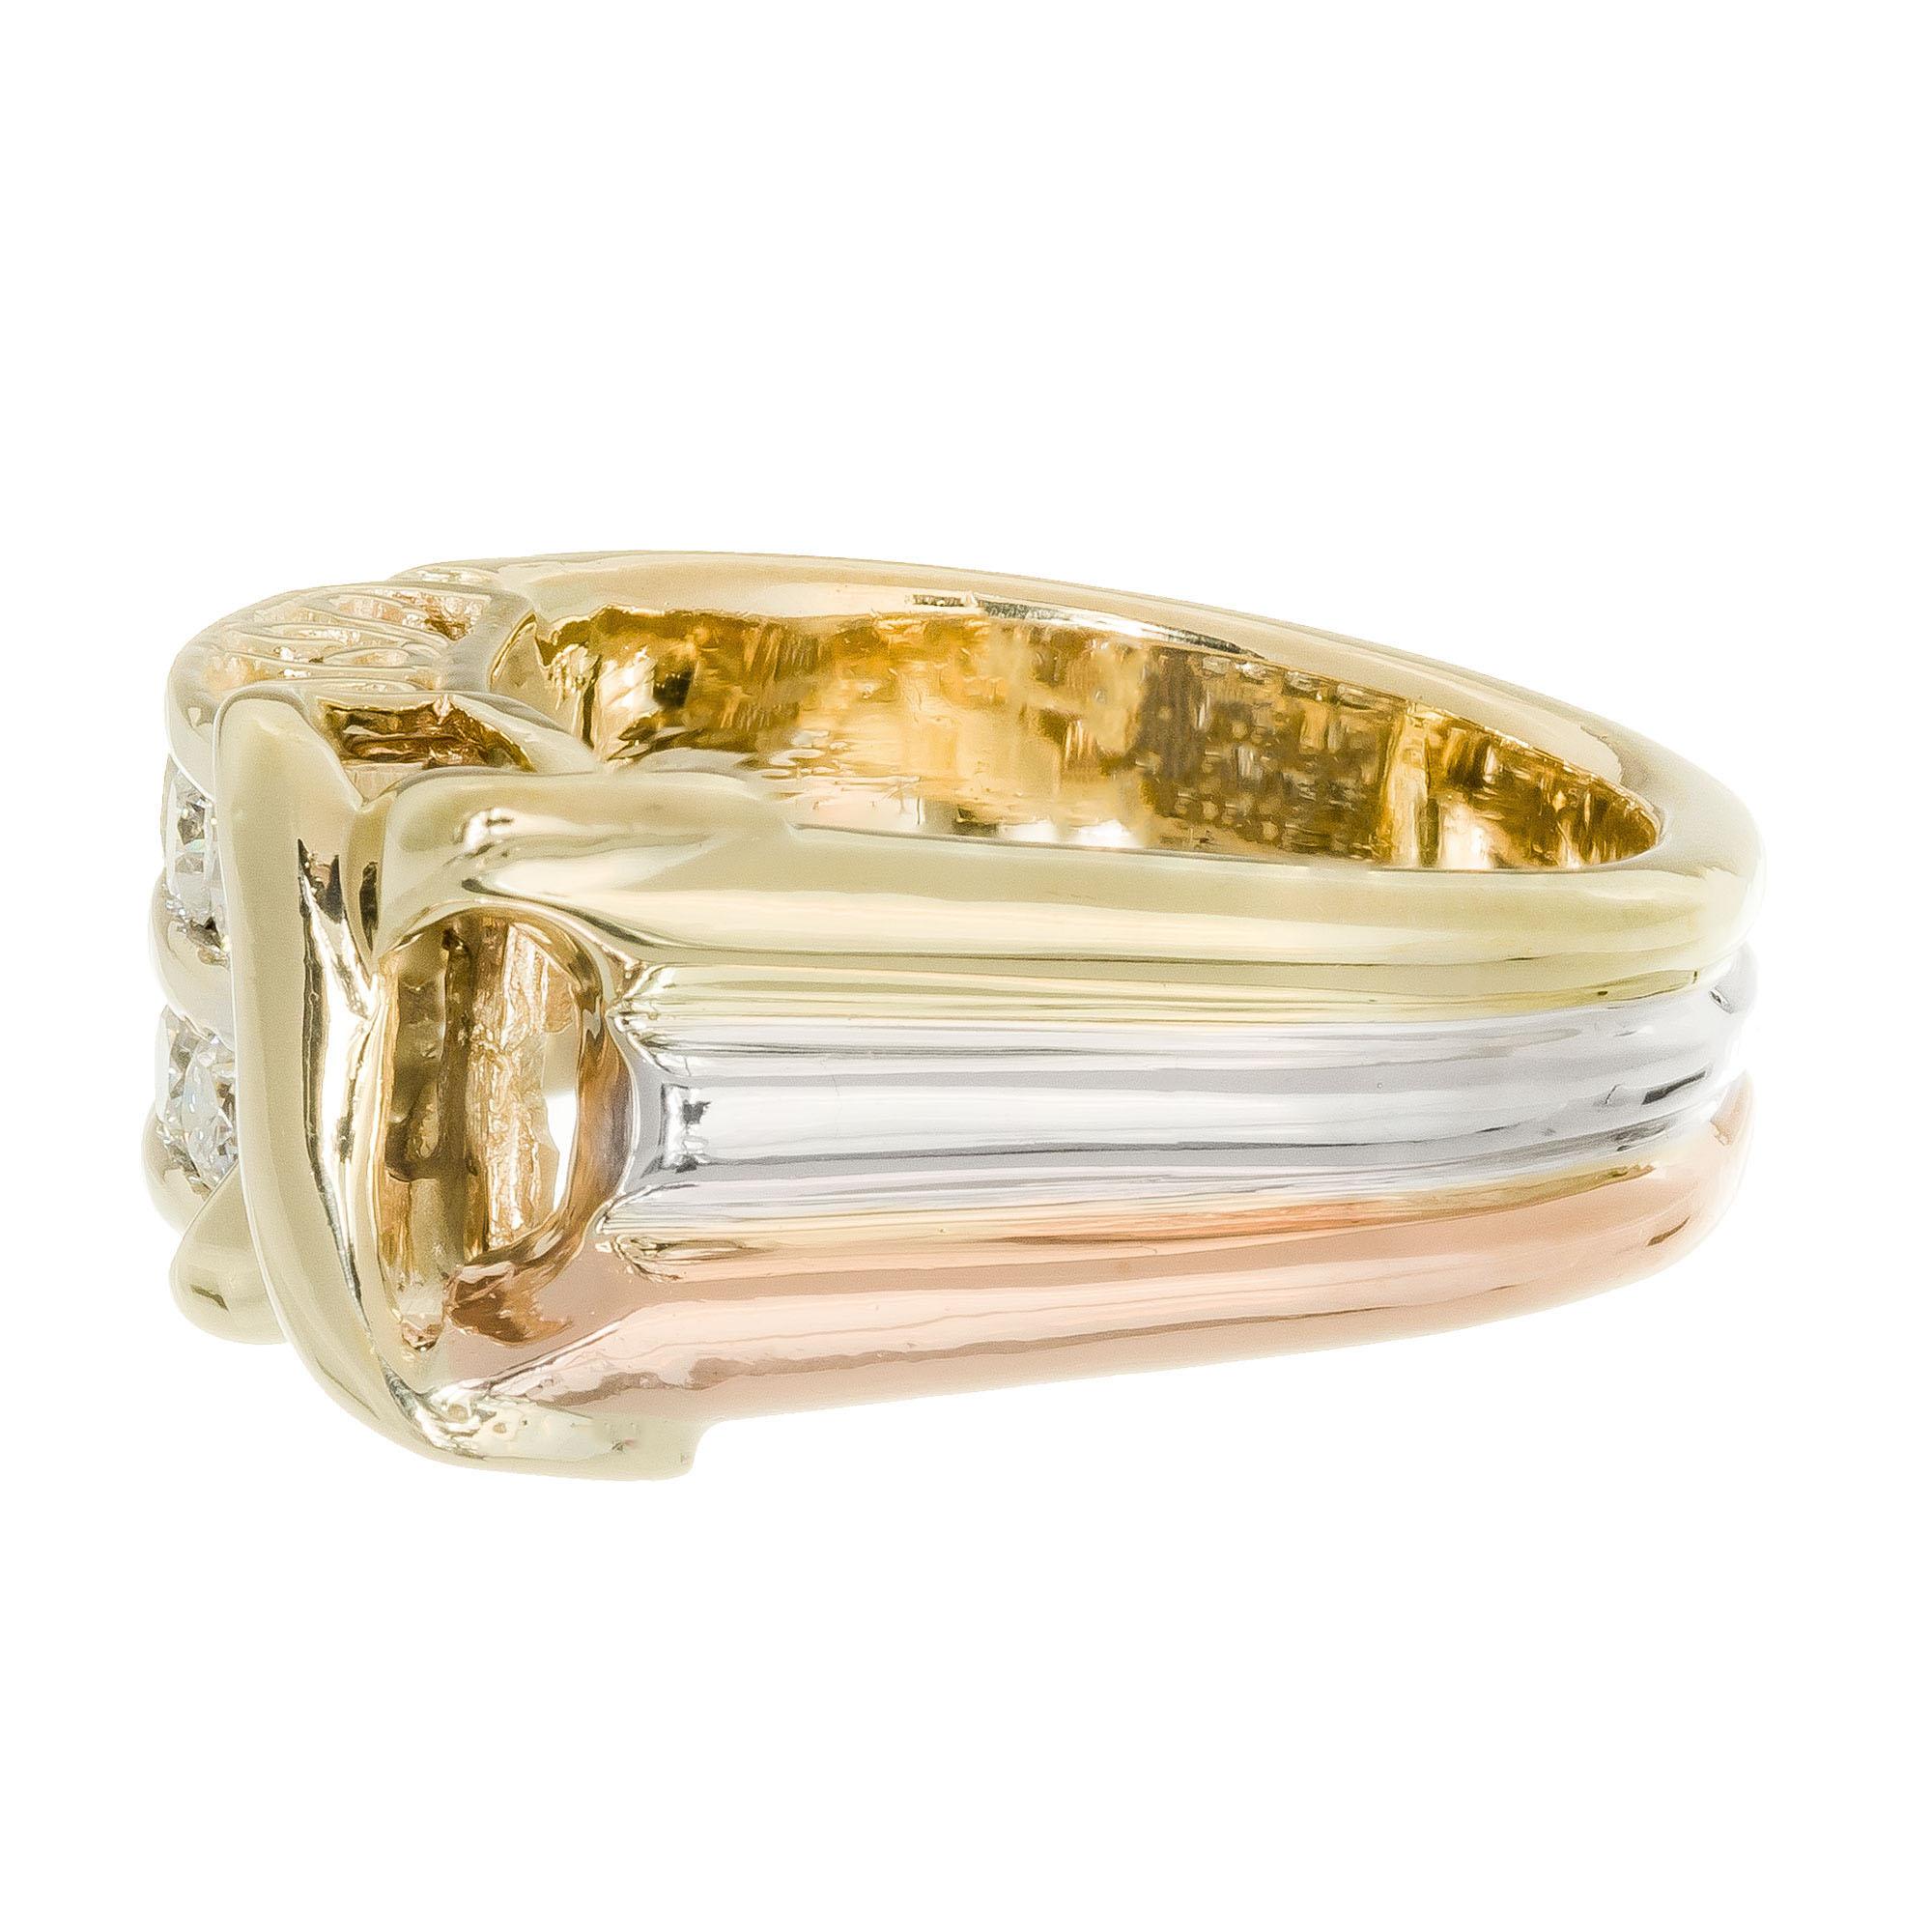 Designer ADE diamond ring.  The shank of the ring has a unique shape.  It is flat on one side and curved on the other.  It is made from three separate bands of gold, rose, white and yellow, 14k.  There is an “X” on the top and then two rows of 8